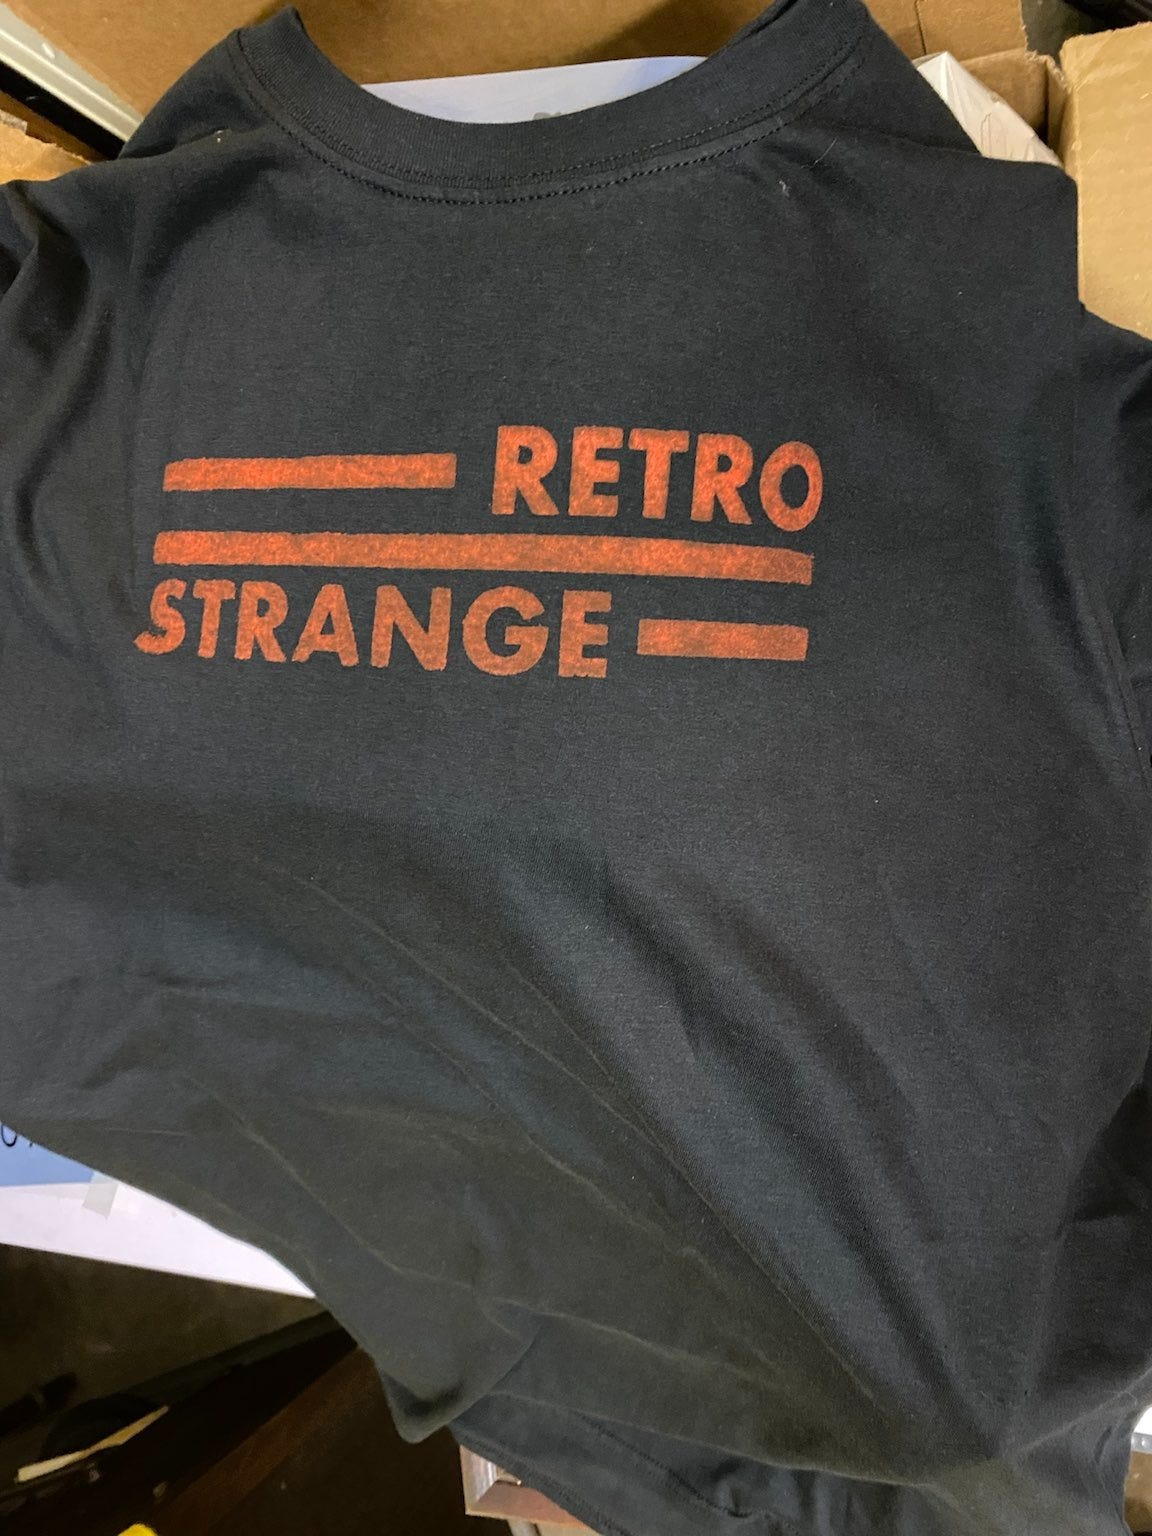 A photograph of a black t-shirt with the RetroStrange logo printed on it in orange.